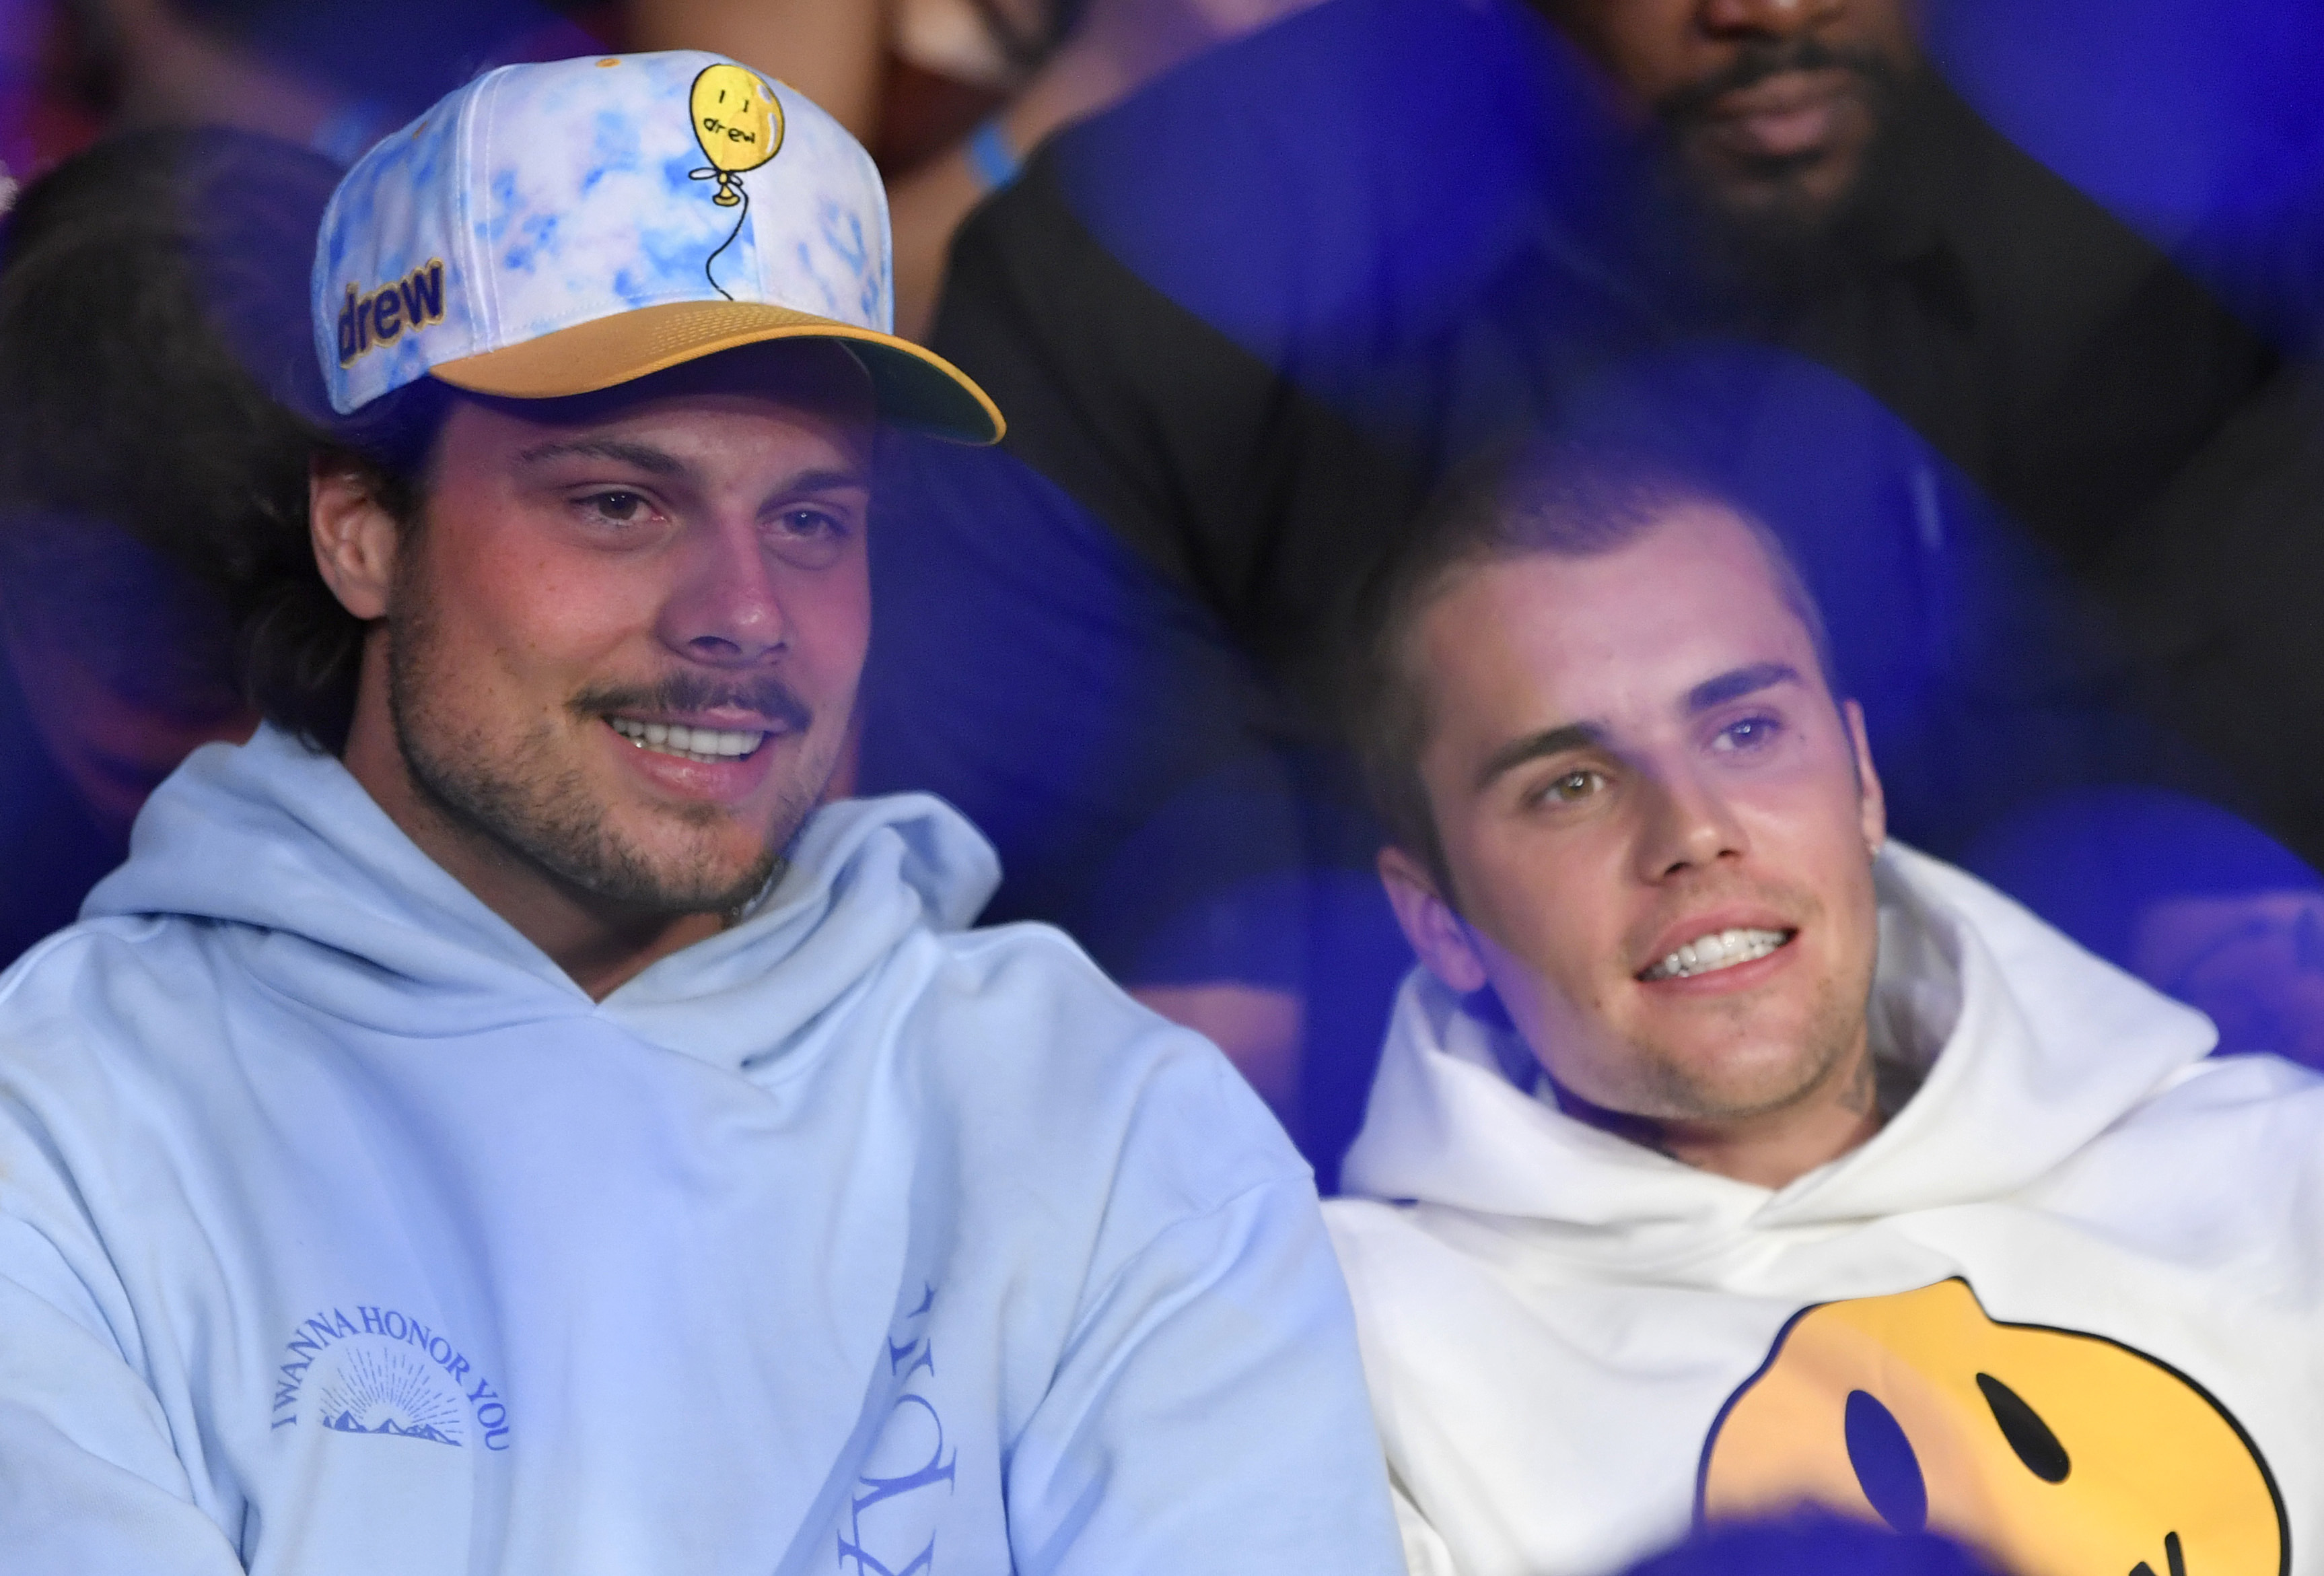 Bieber-Themed Leafs Jersey the NHL's Newest Best-Seller - The Hockey News